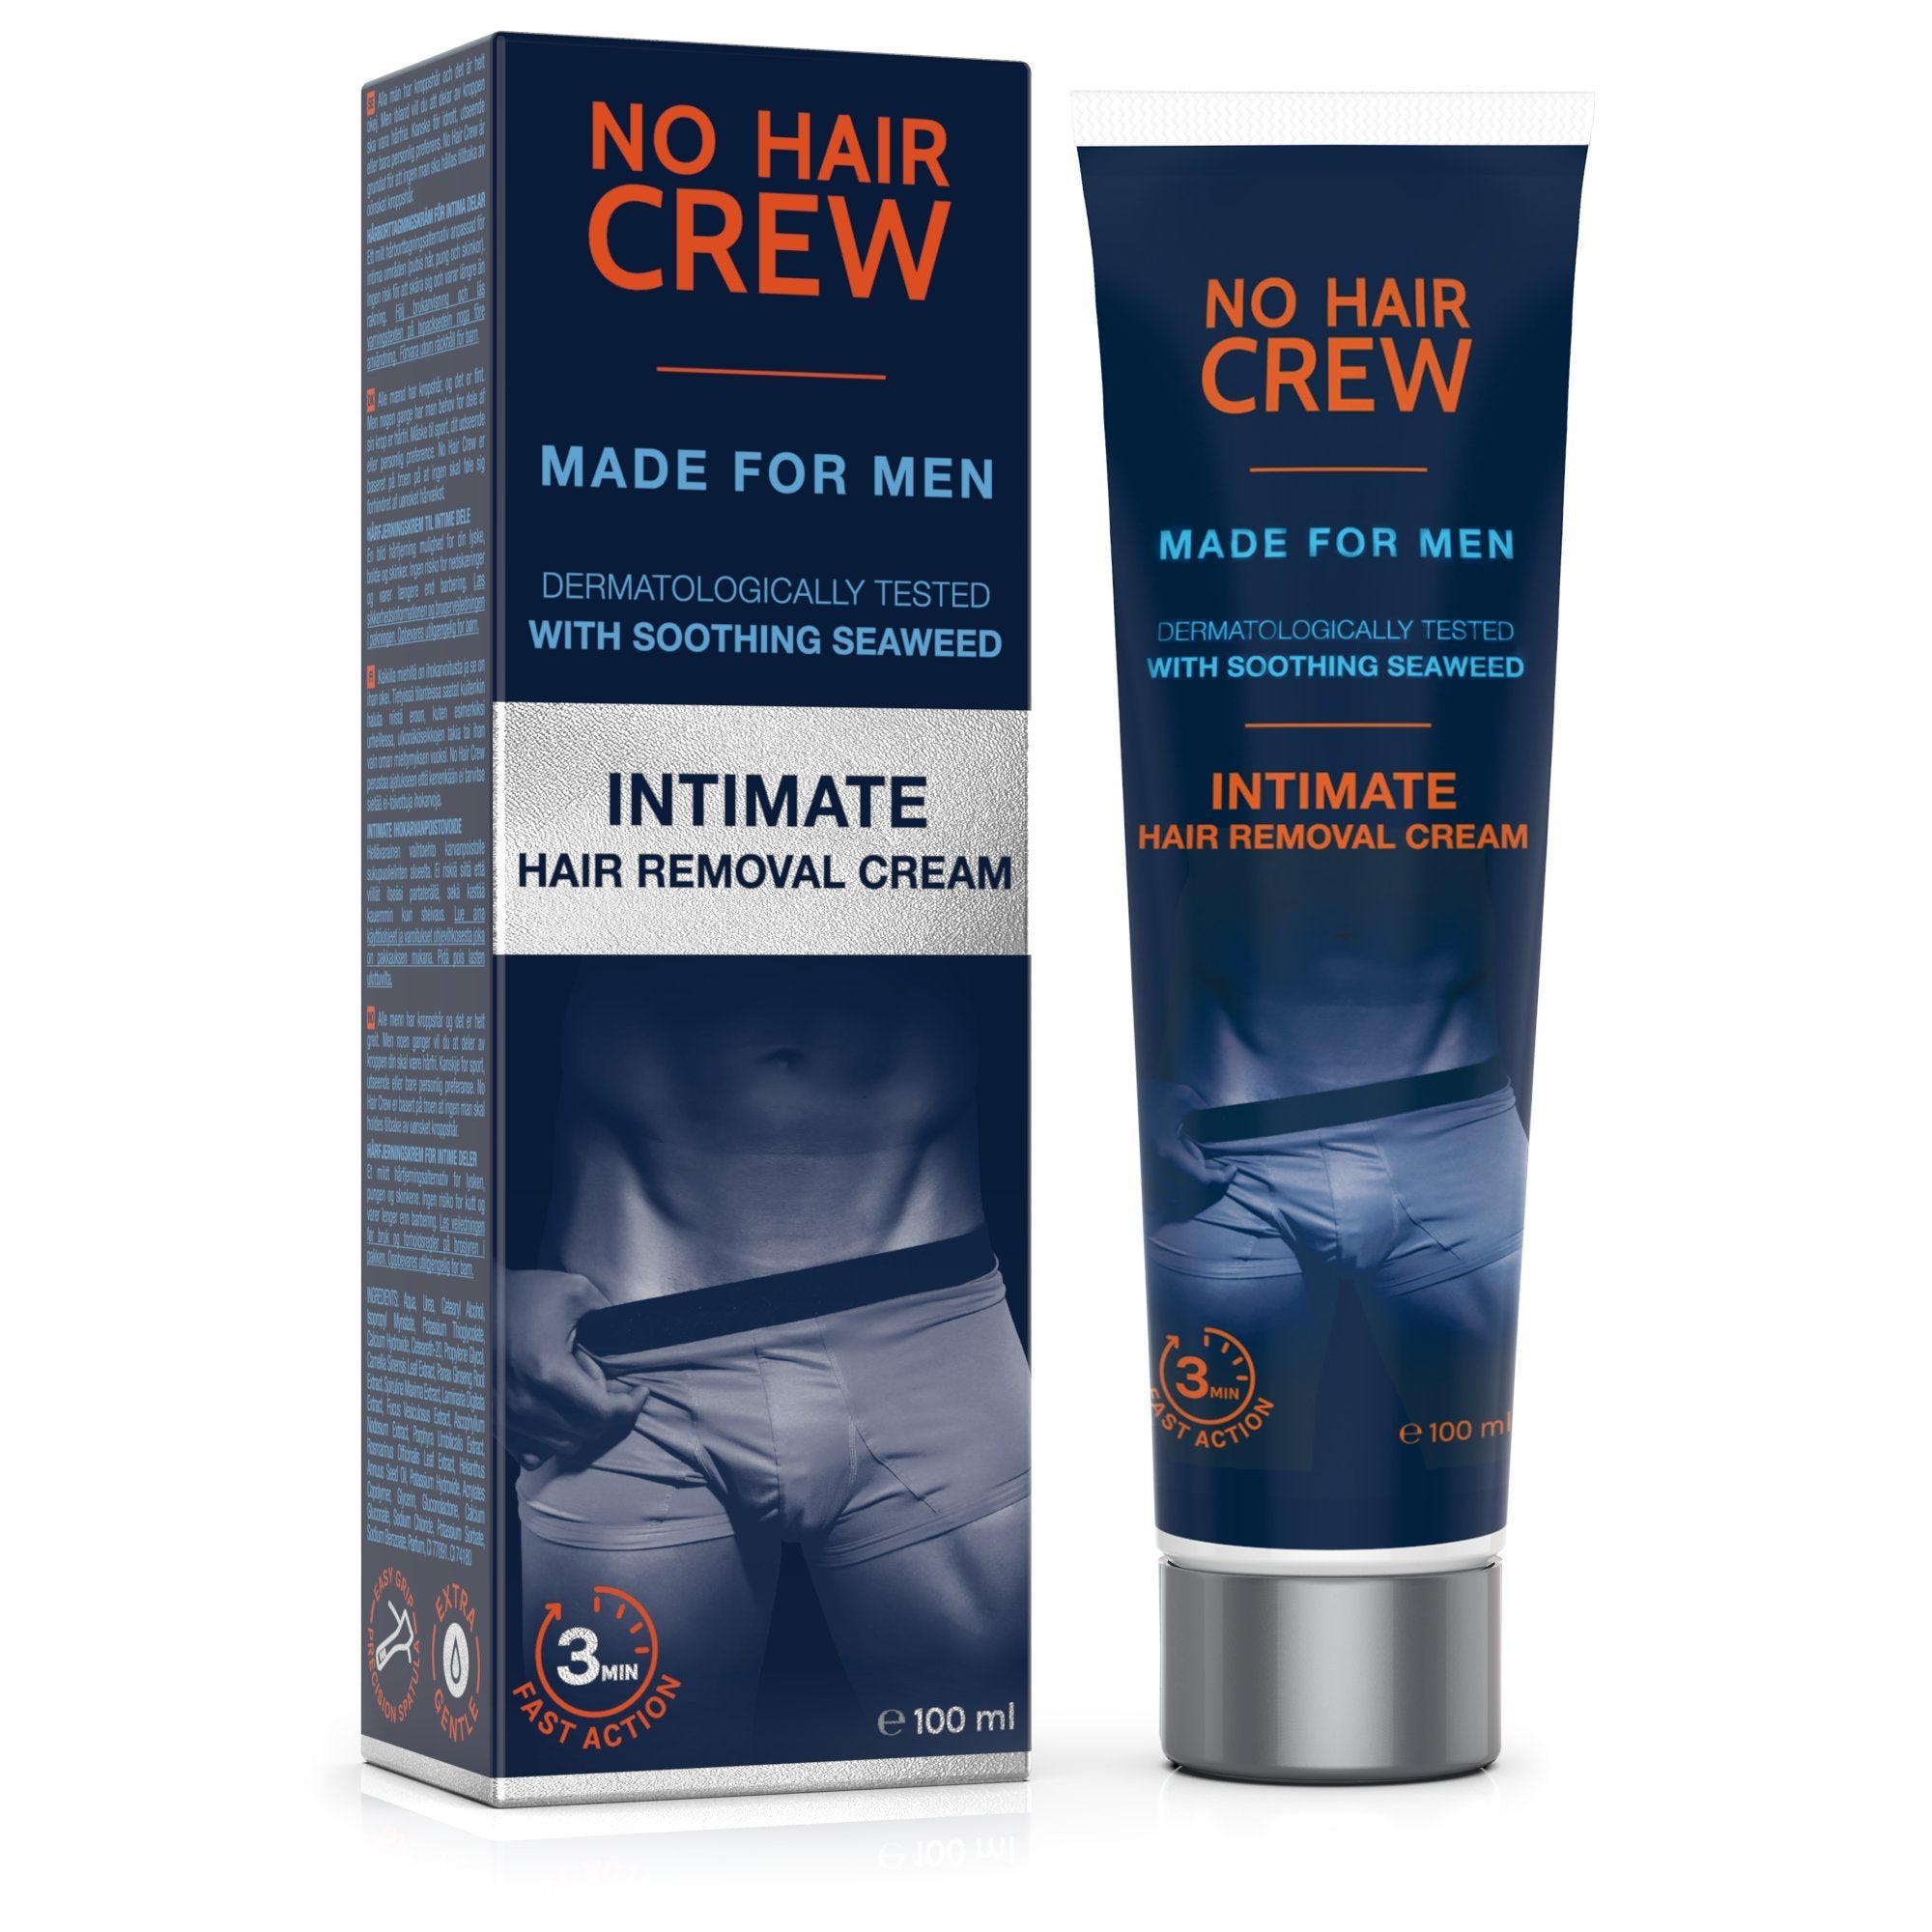 NO Hair Crew Intimate Hair Removal Cream - Extra Gentle Depilatory Cream for Sensitive Areas. Made for Men, 100 ml